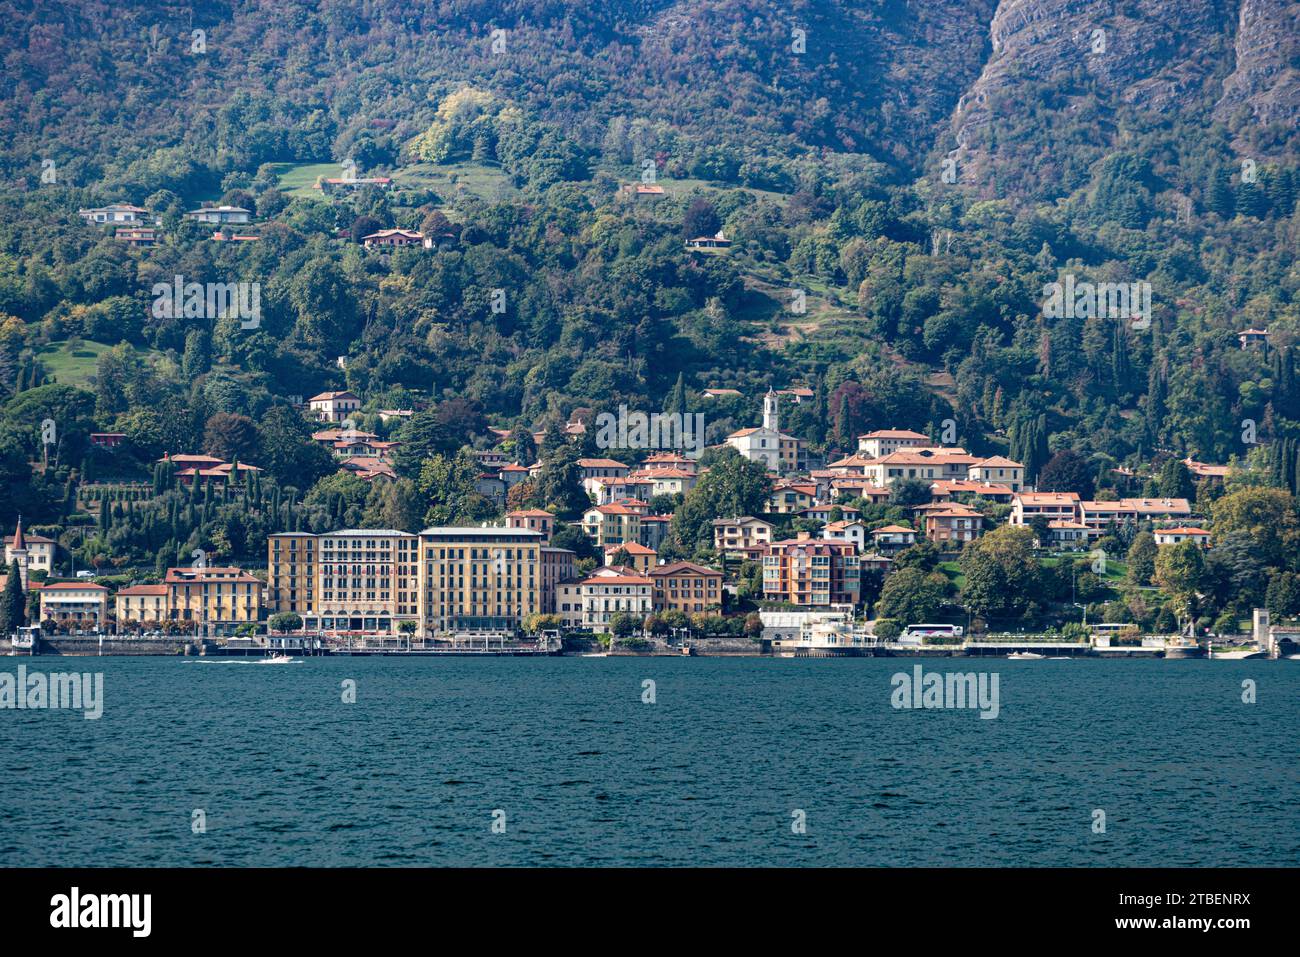 Villa Carlotta photographed from out on Lake Como, Italy Stock Photo